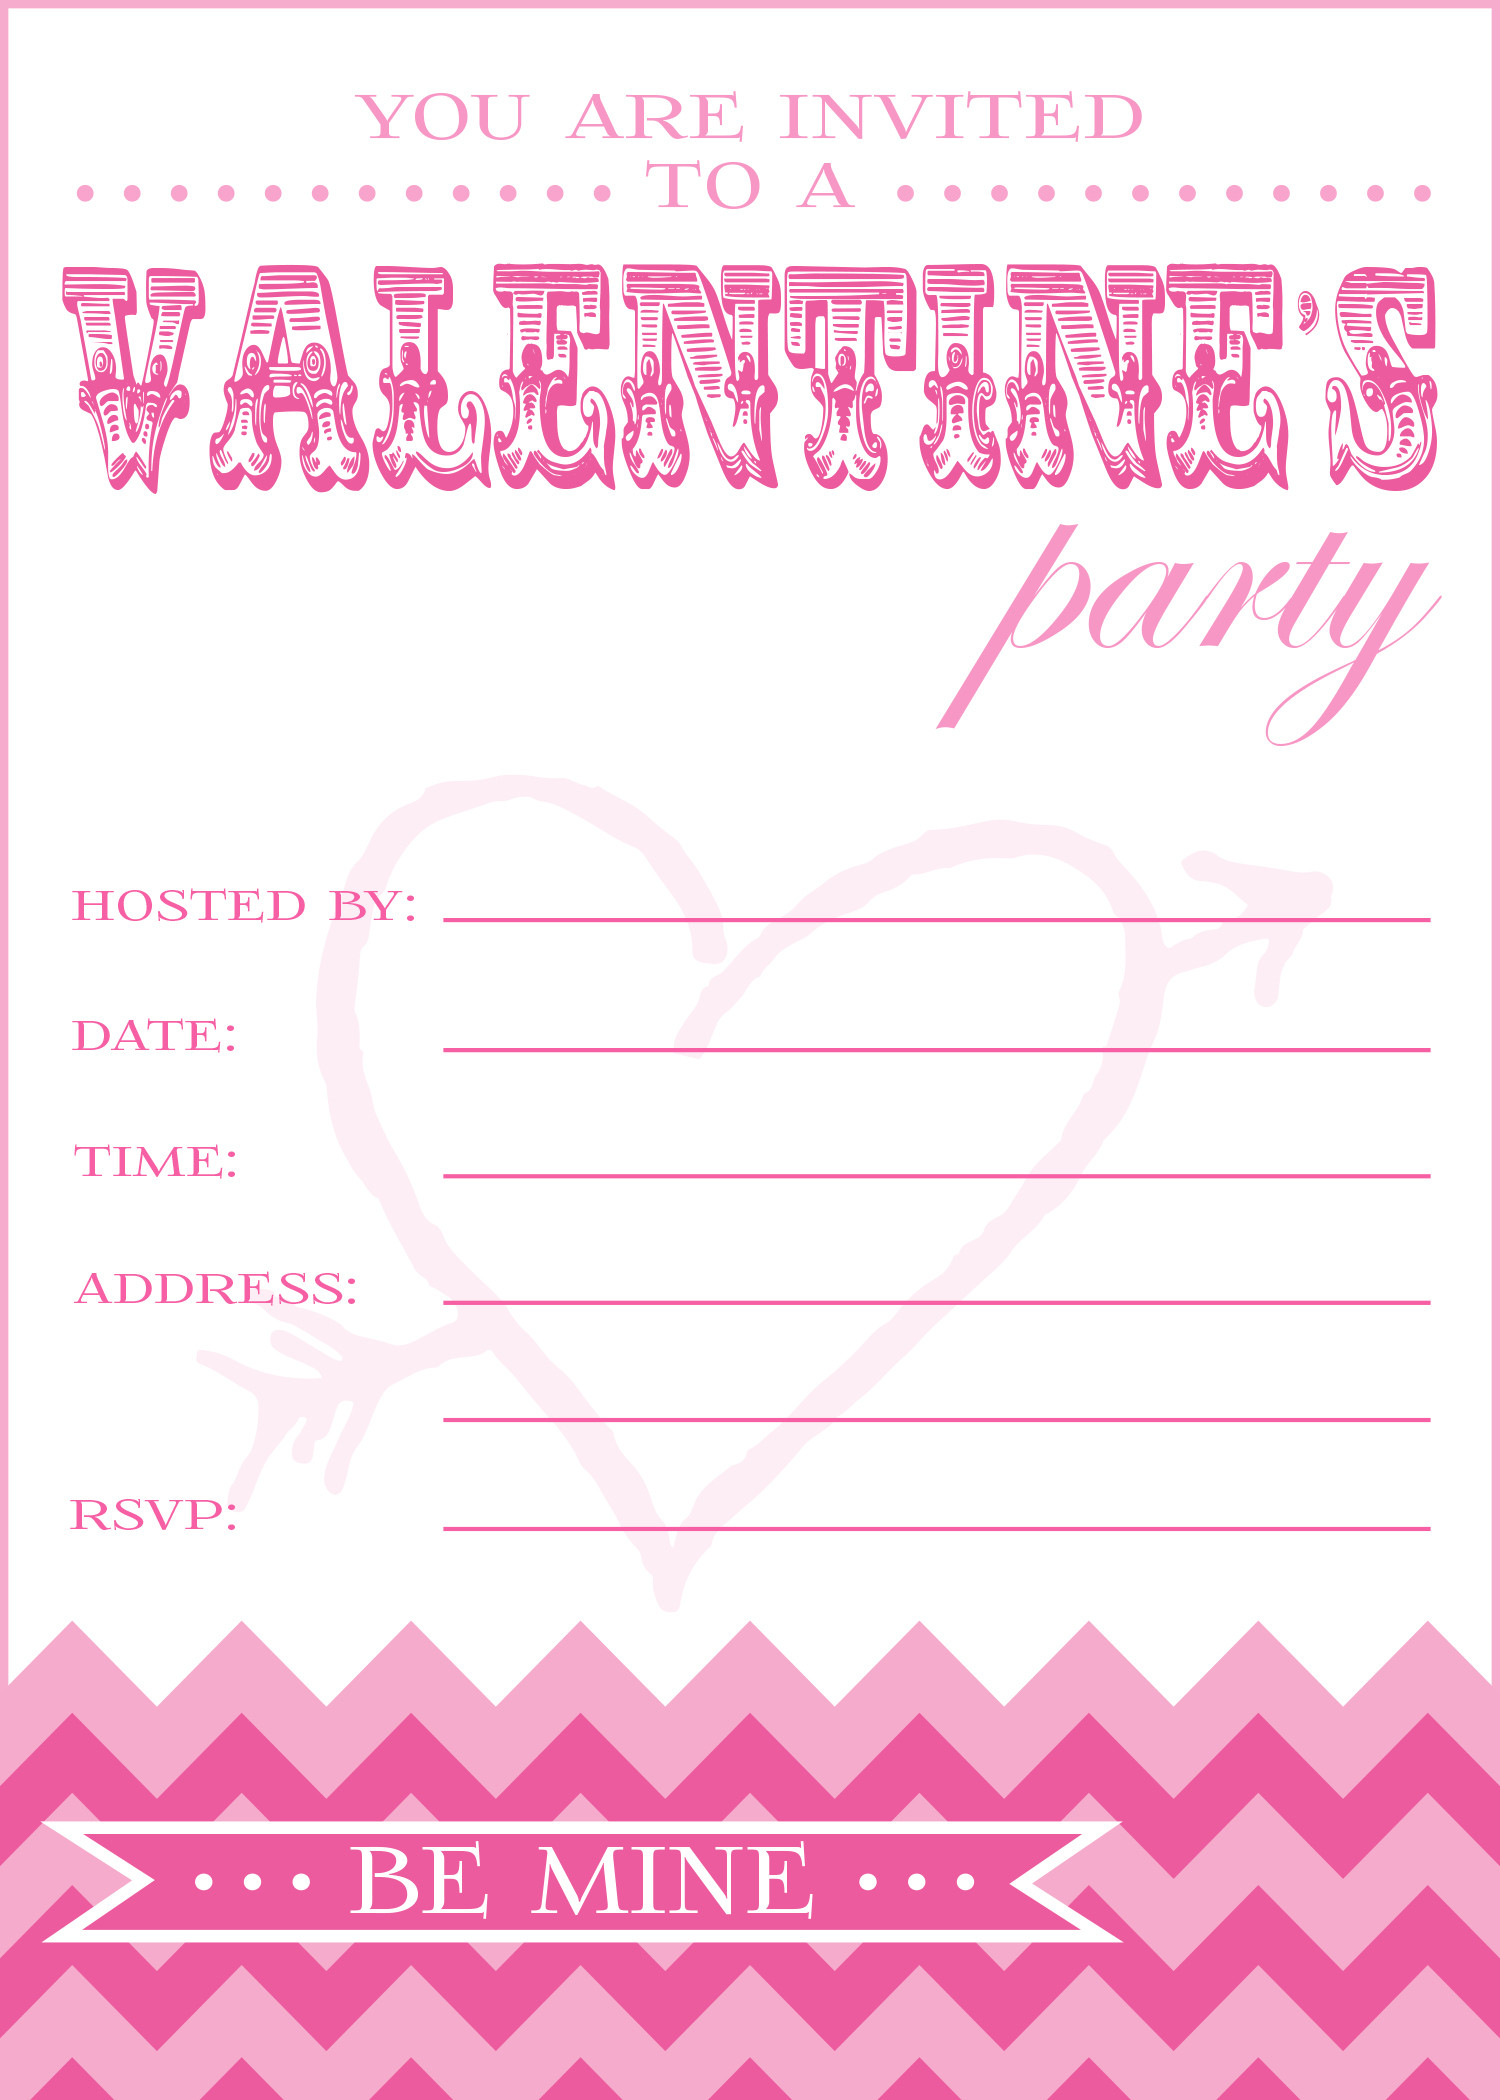 Valentines Day Party Invitations
 FREE Valentine s Day Party Printables from Pick Print